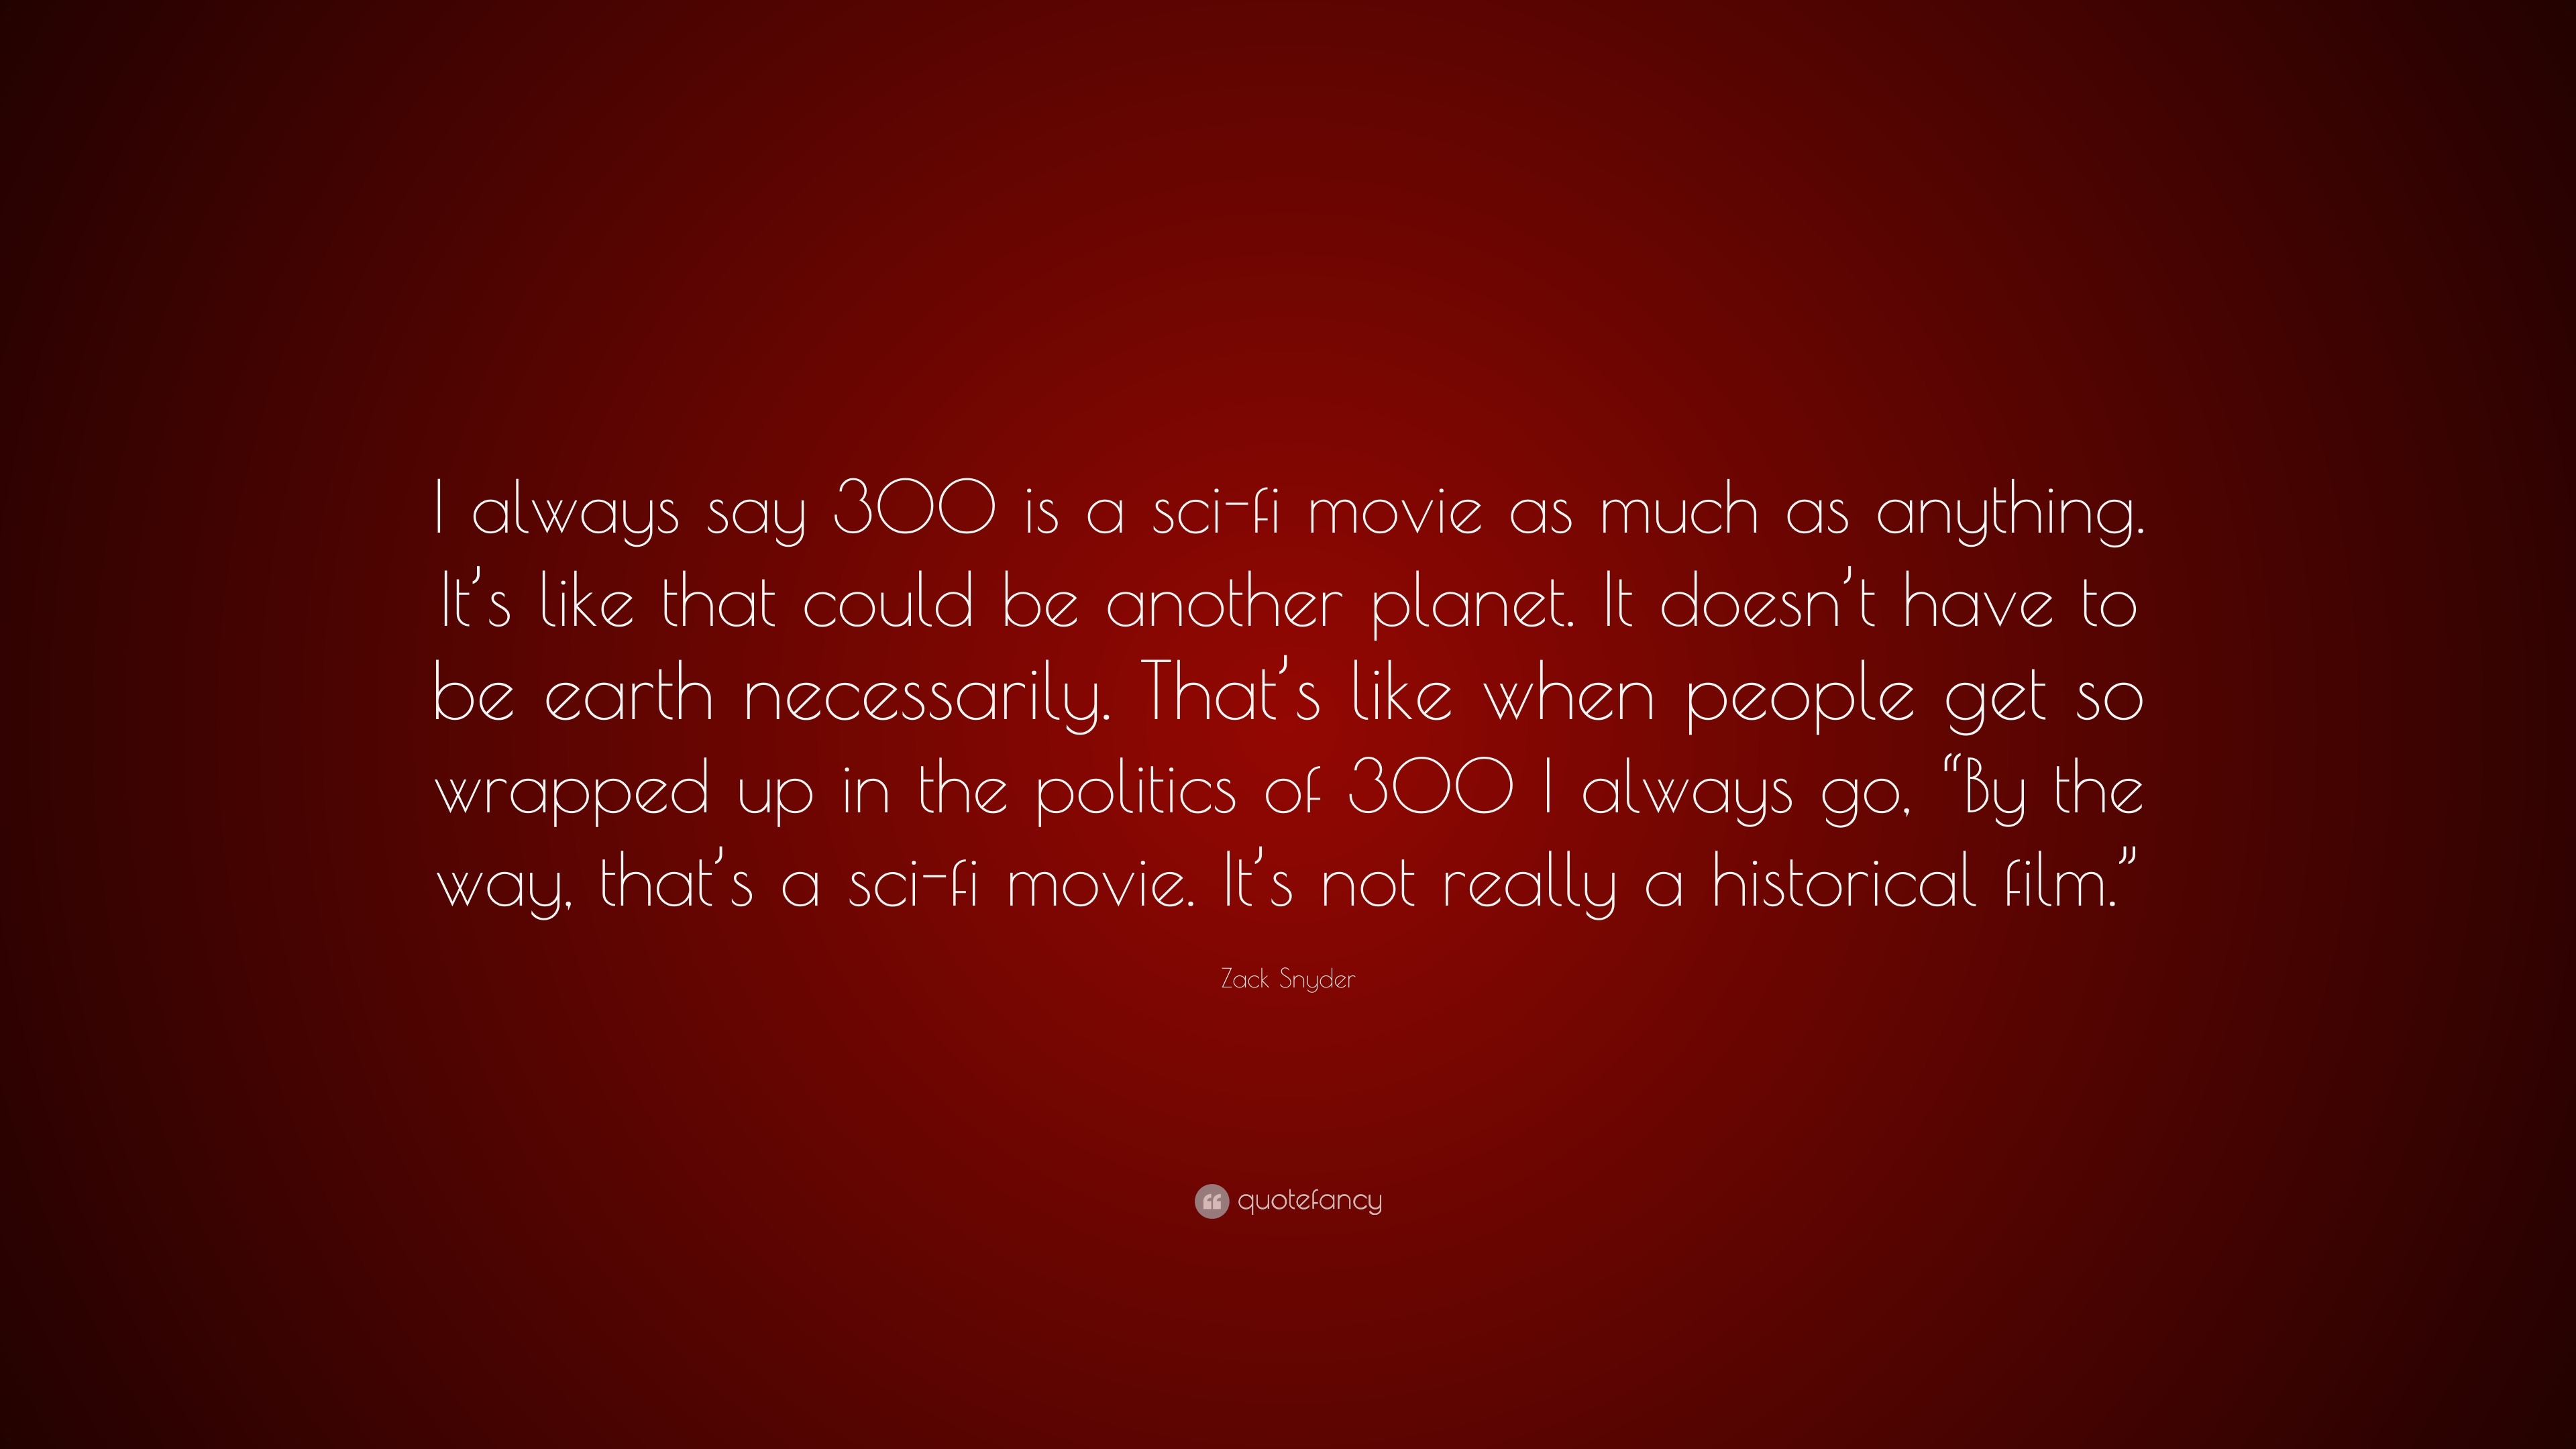 quotes from the movie 300